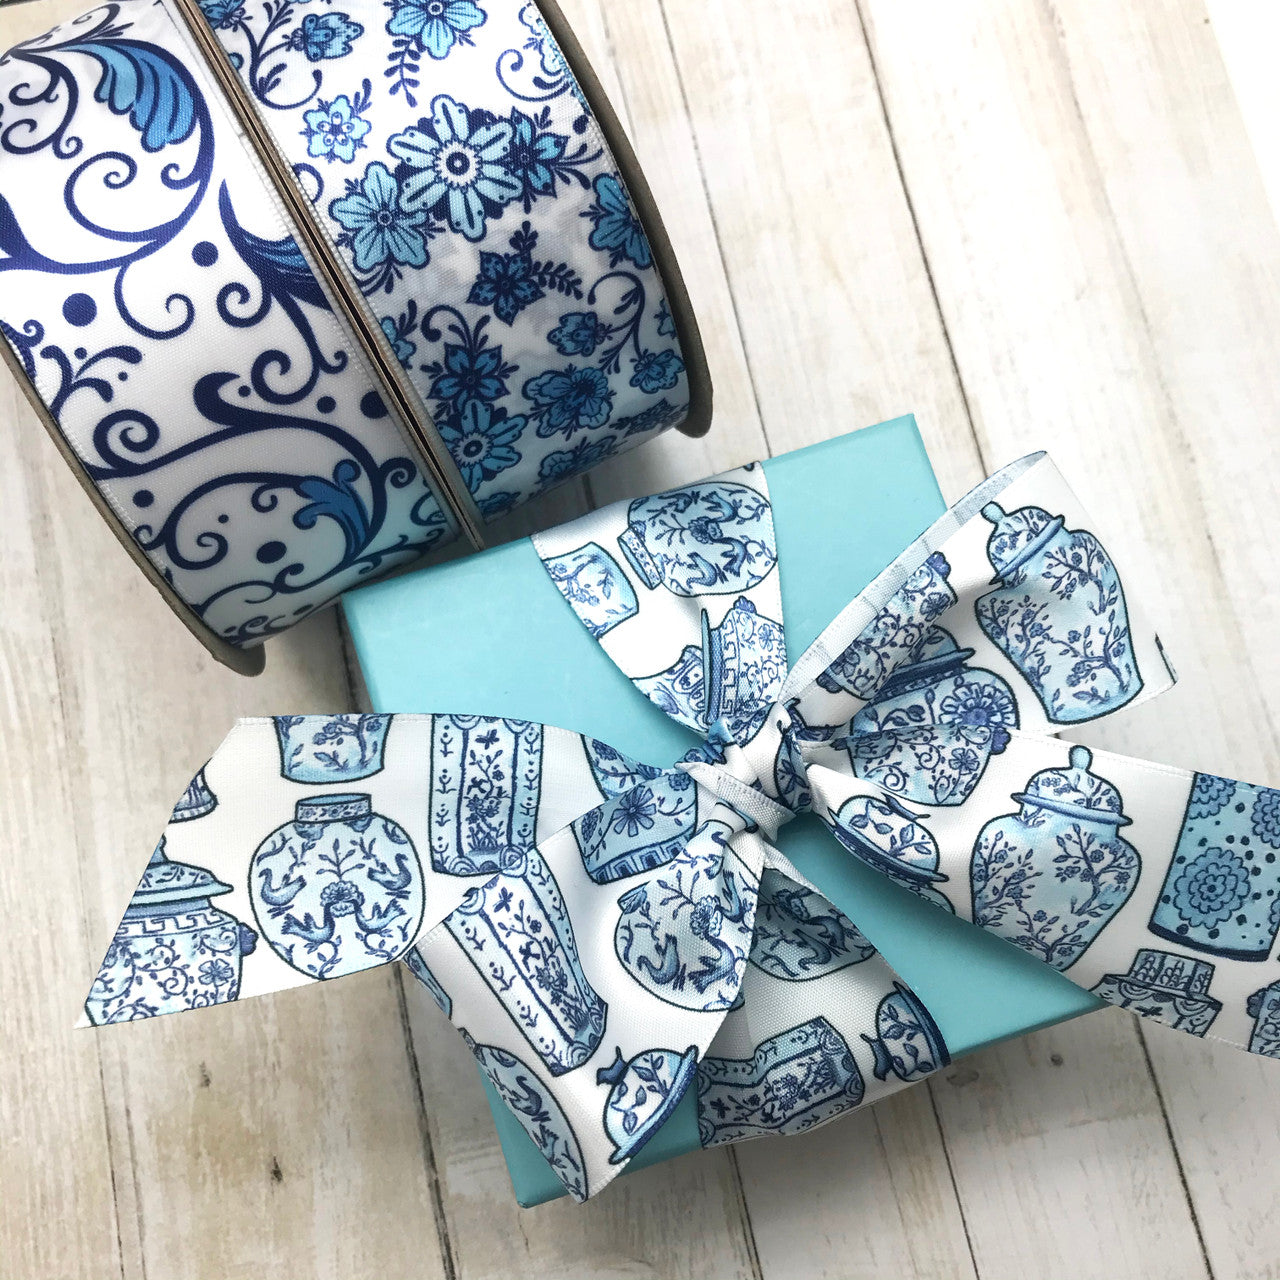 Our trio of Chinoiserie style ginger jar designs are ideal for mixing and matching for gift wrap and design projects!